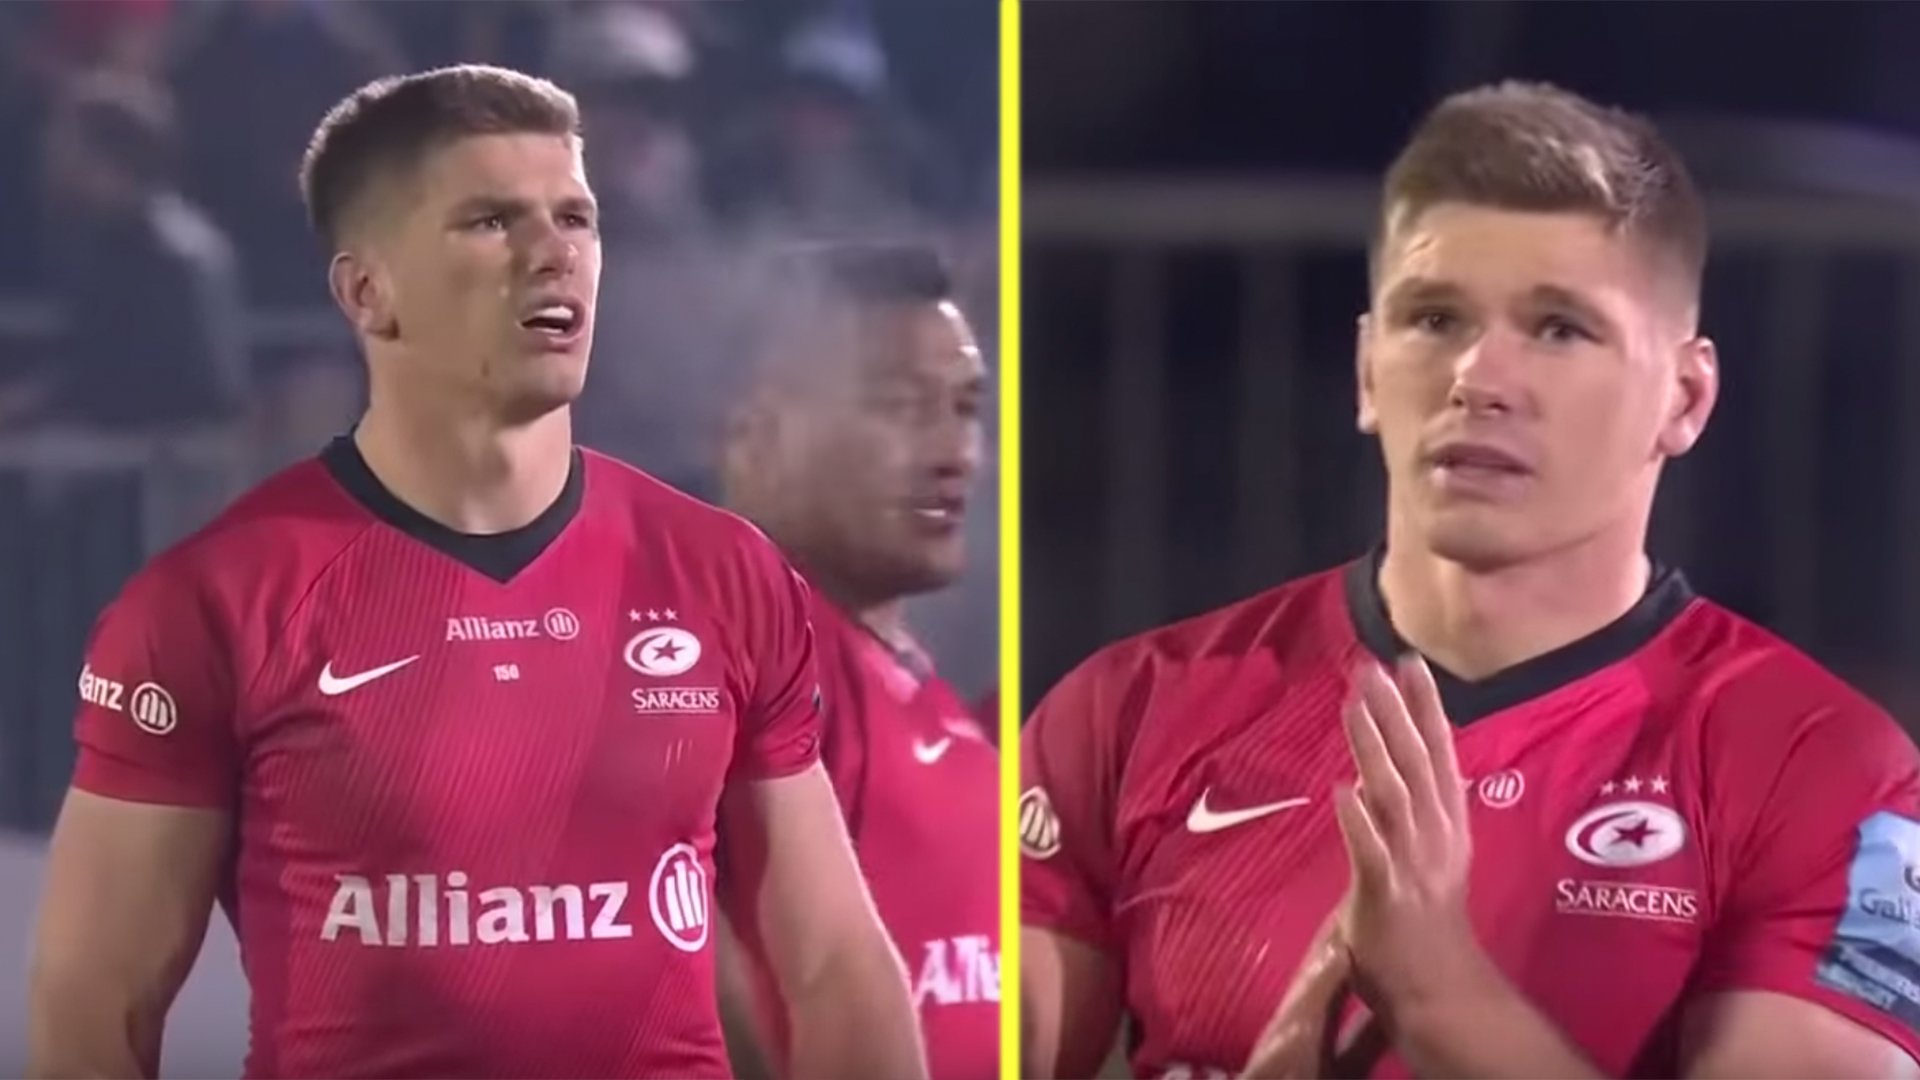 Owen Farrell's titanic performance last weekend is clear evidence that he is still one of the best players in the World